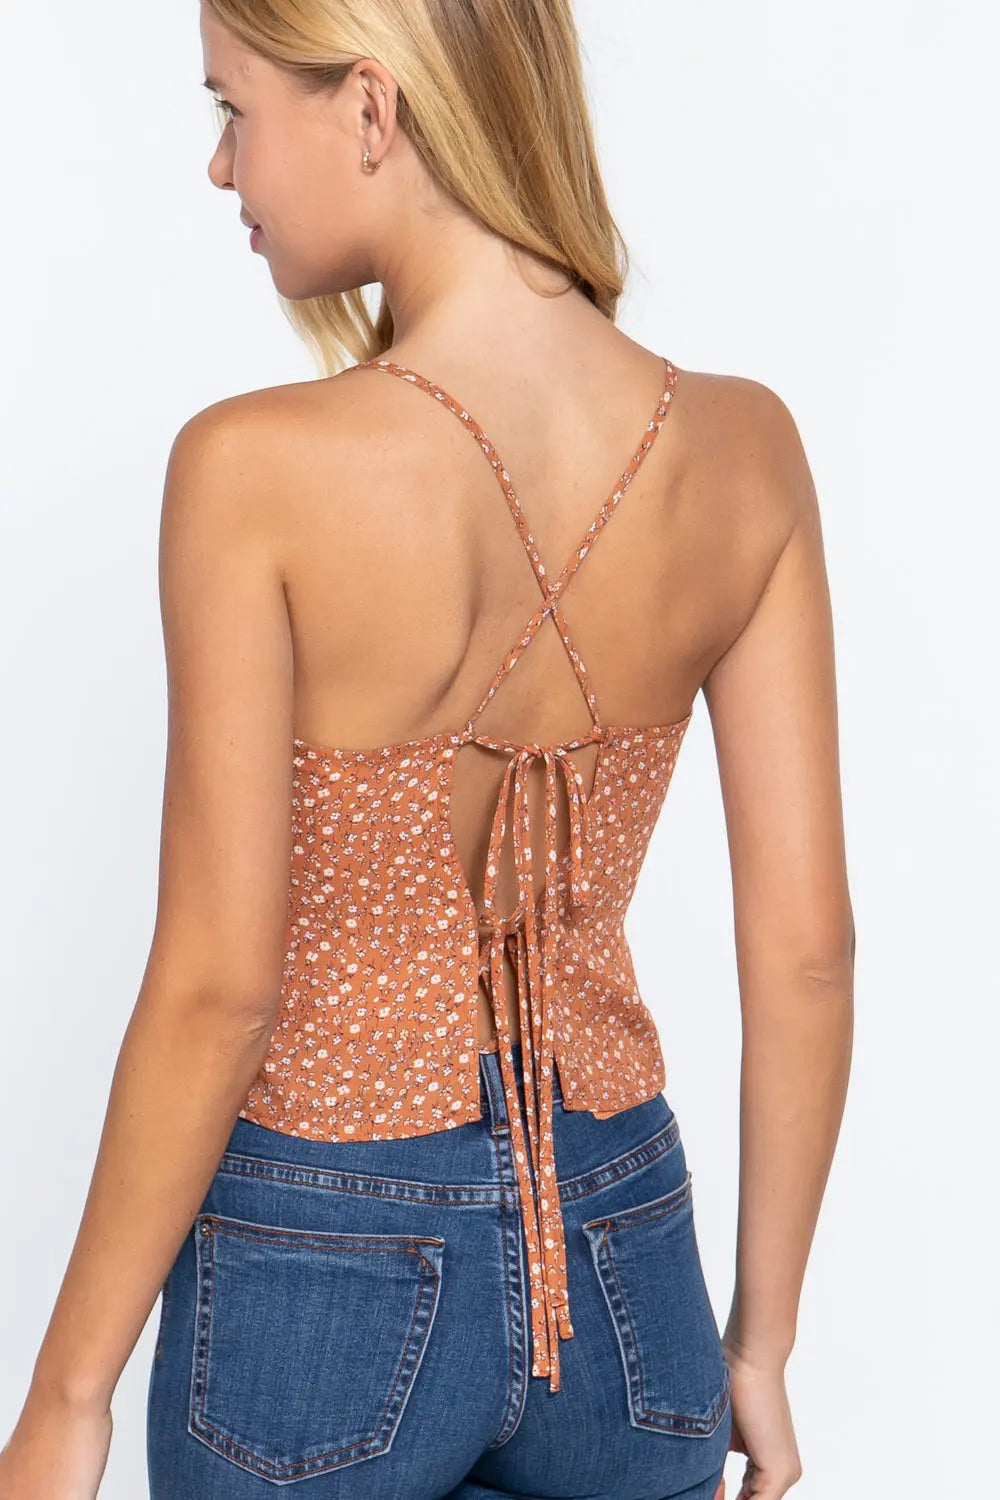 Ruched Open Back Print Cami Woven Top Sunny EvE Fashion